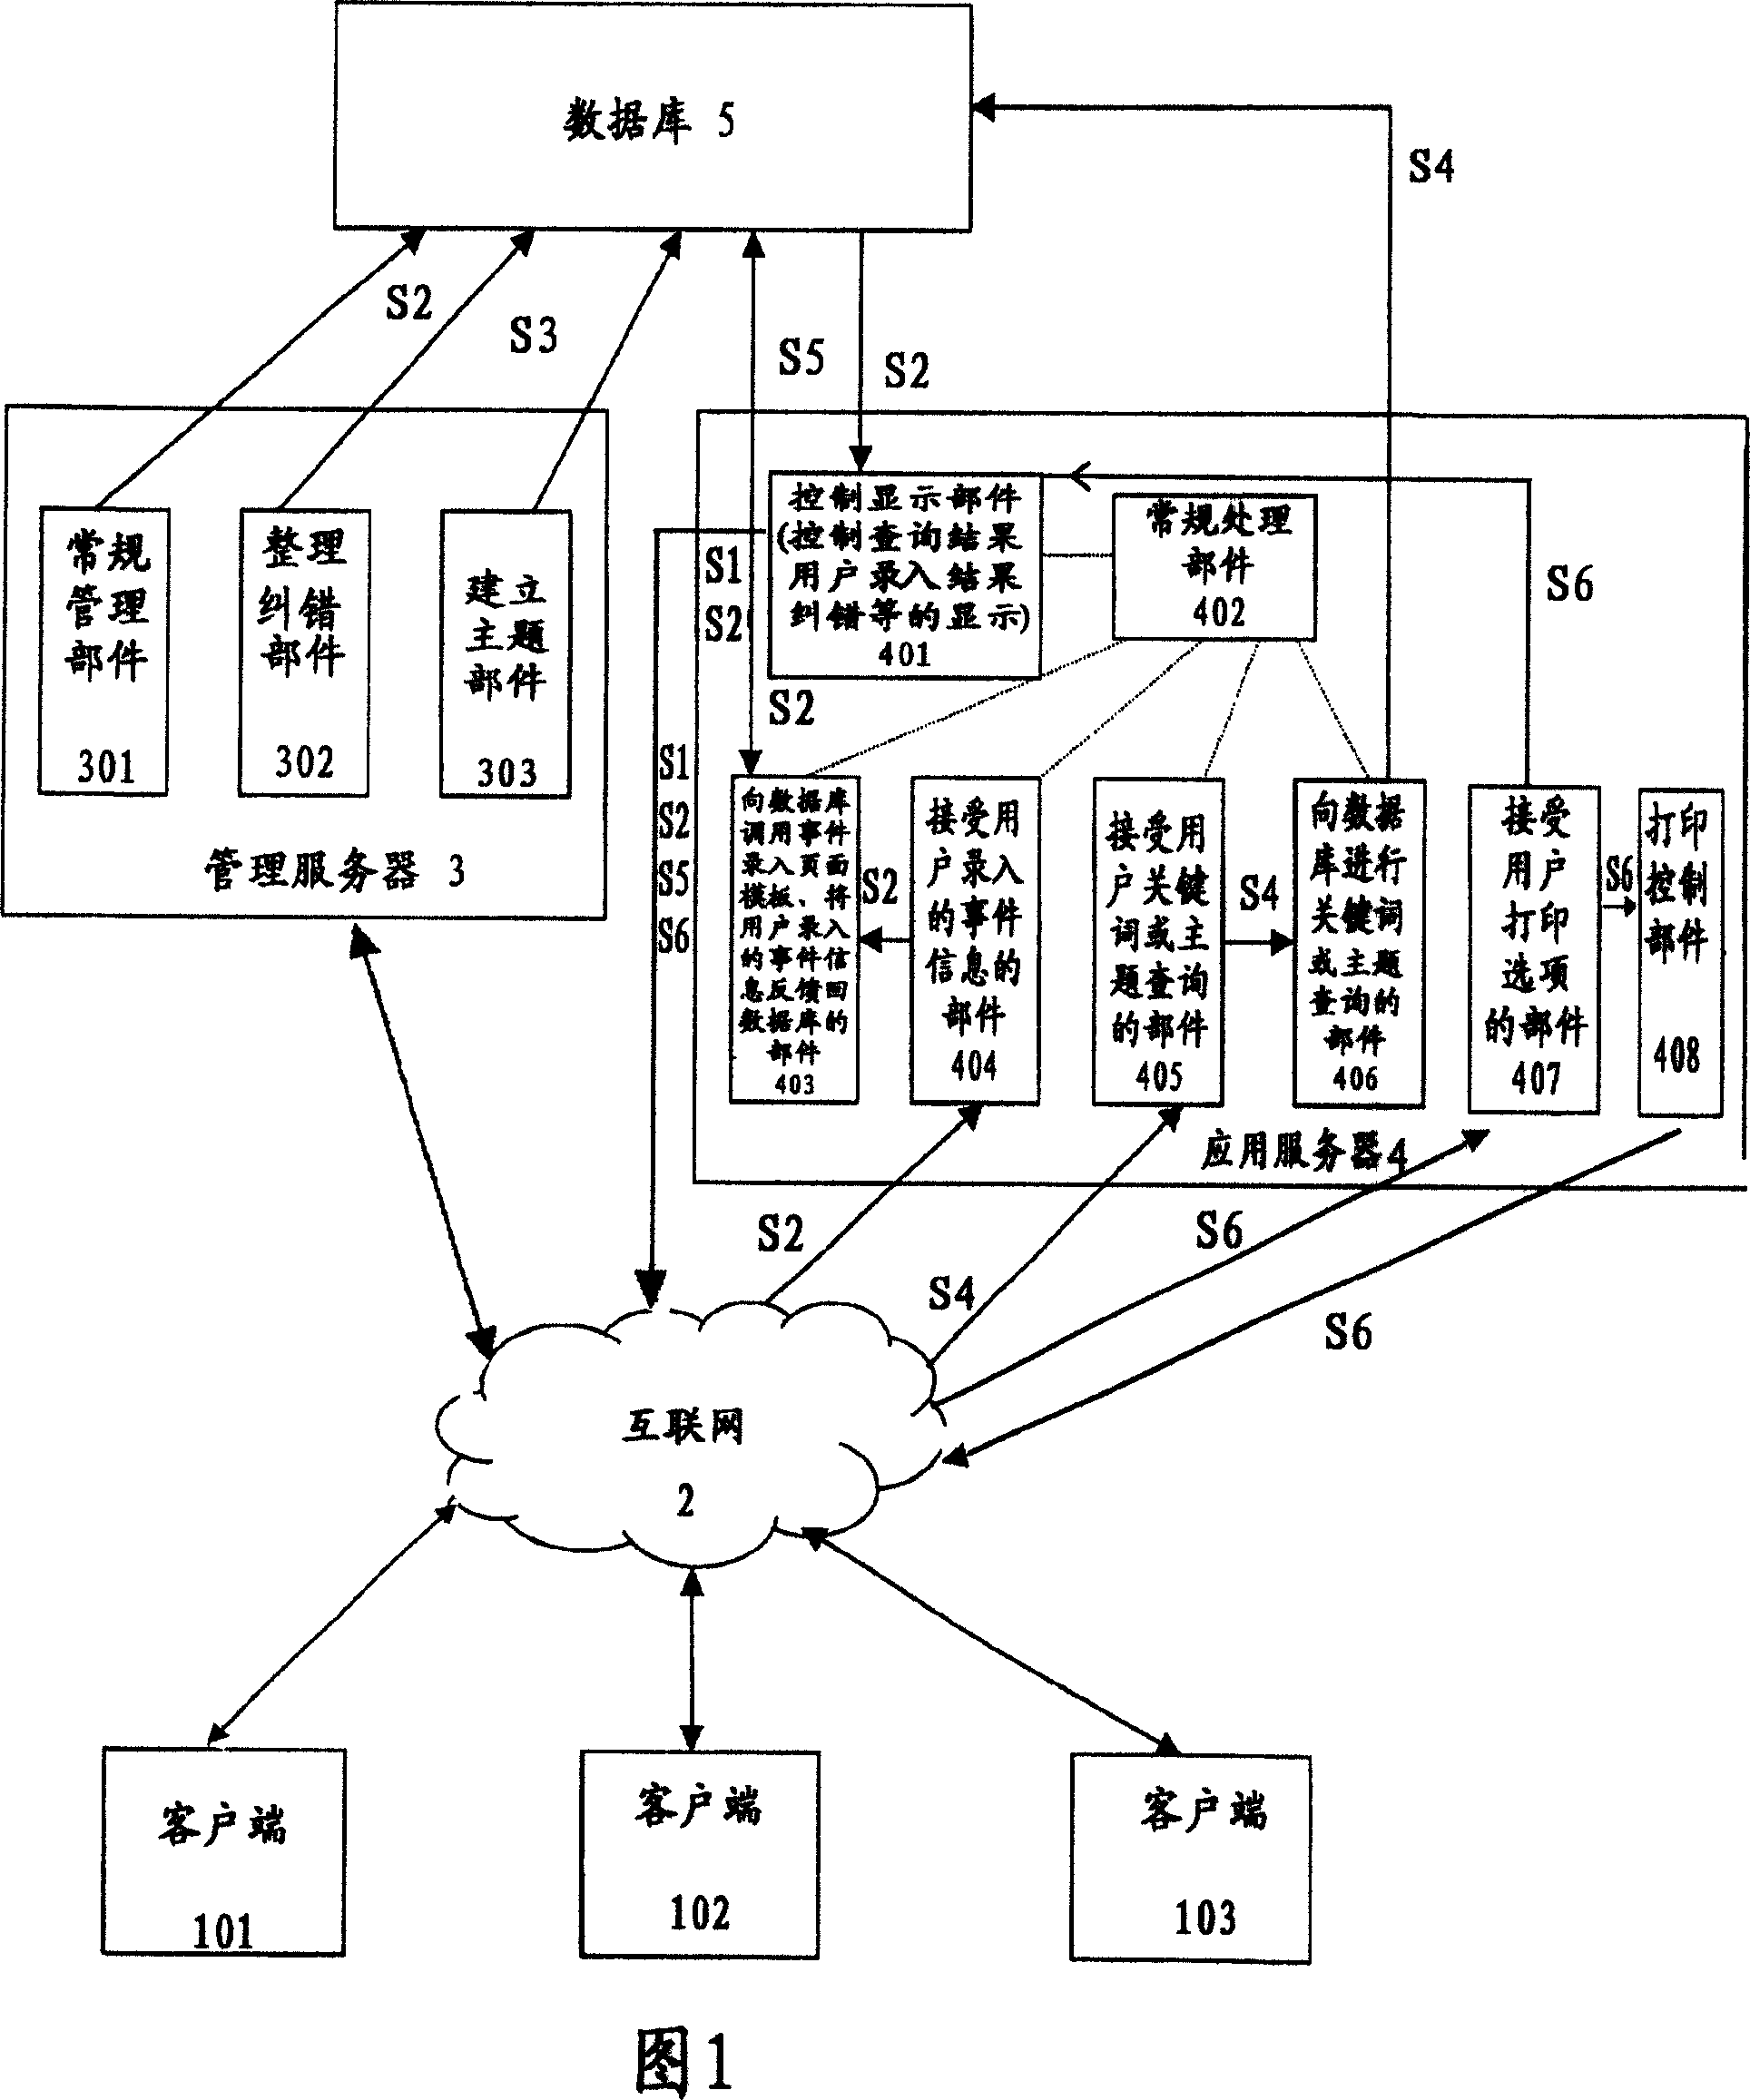 Process for obtaining, and communicating information about affair through internet and system